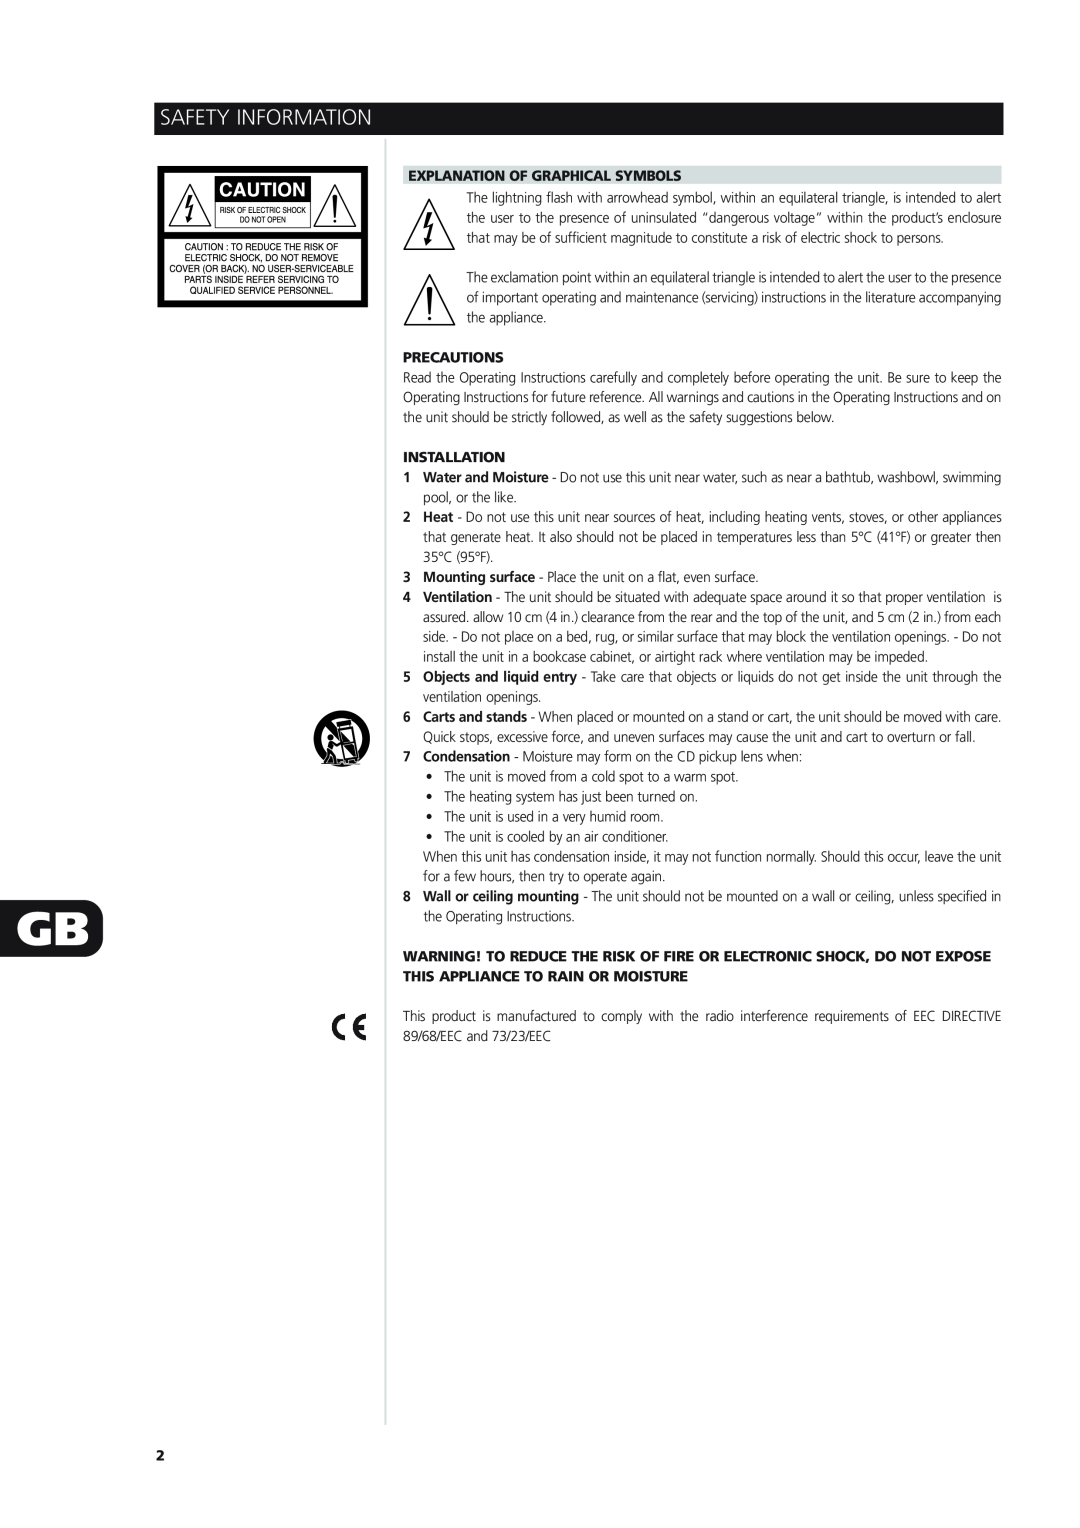 NAD S170 owner manual Safety Information, Explanation Of Graphical Symbols, Precautions, Installation 